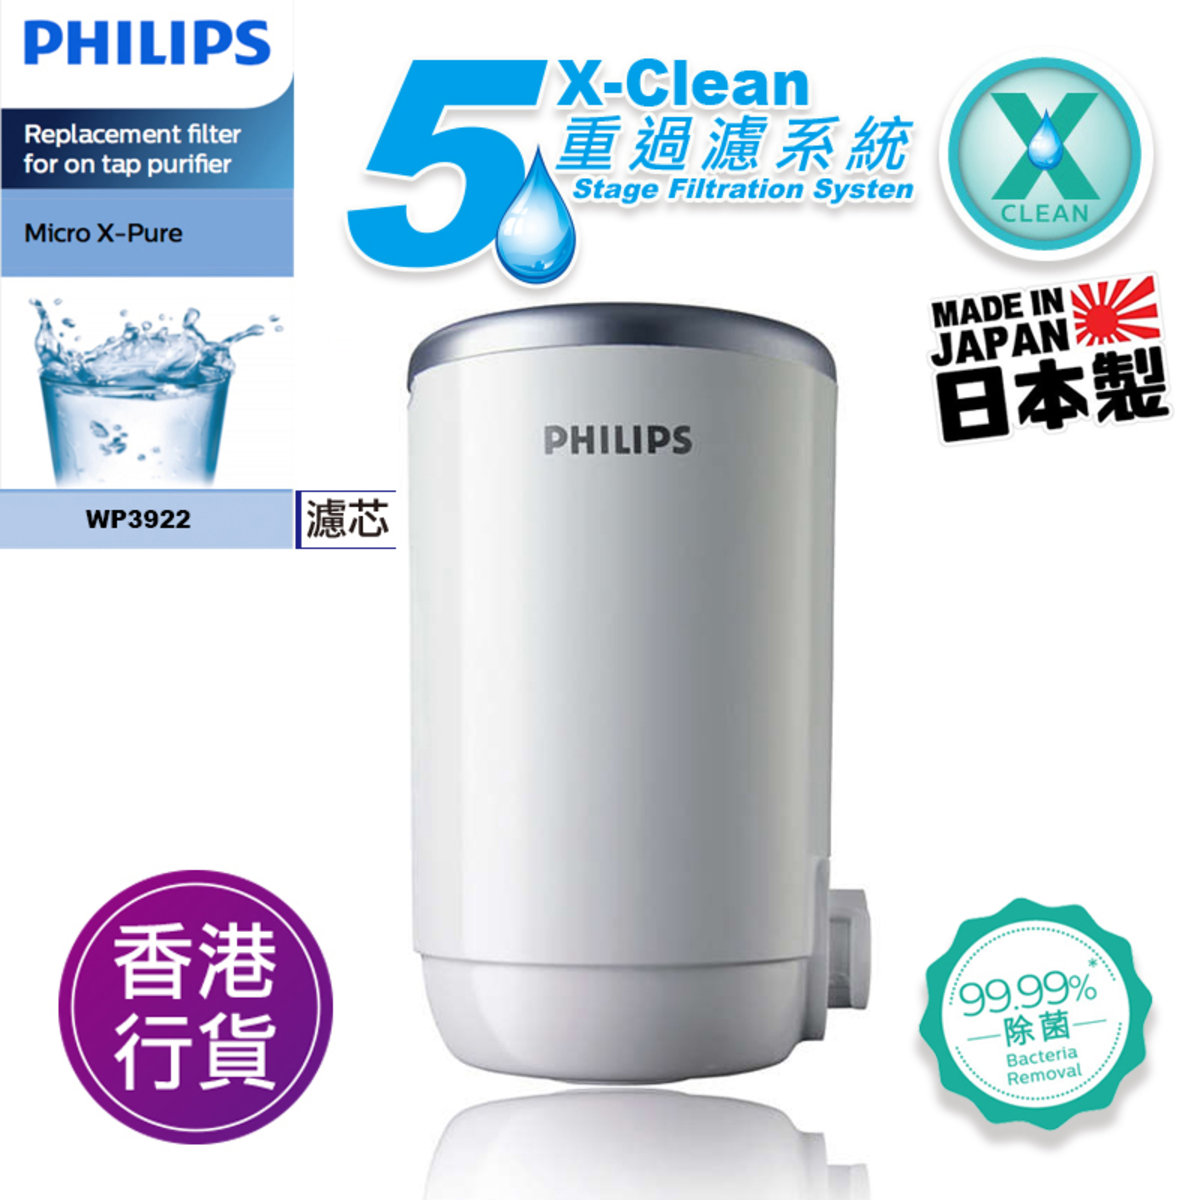 WP3922 faucet water filter replacement filter